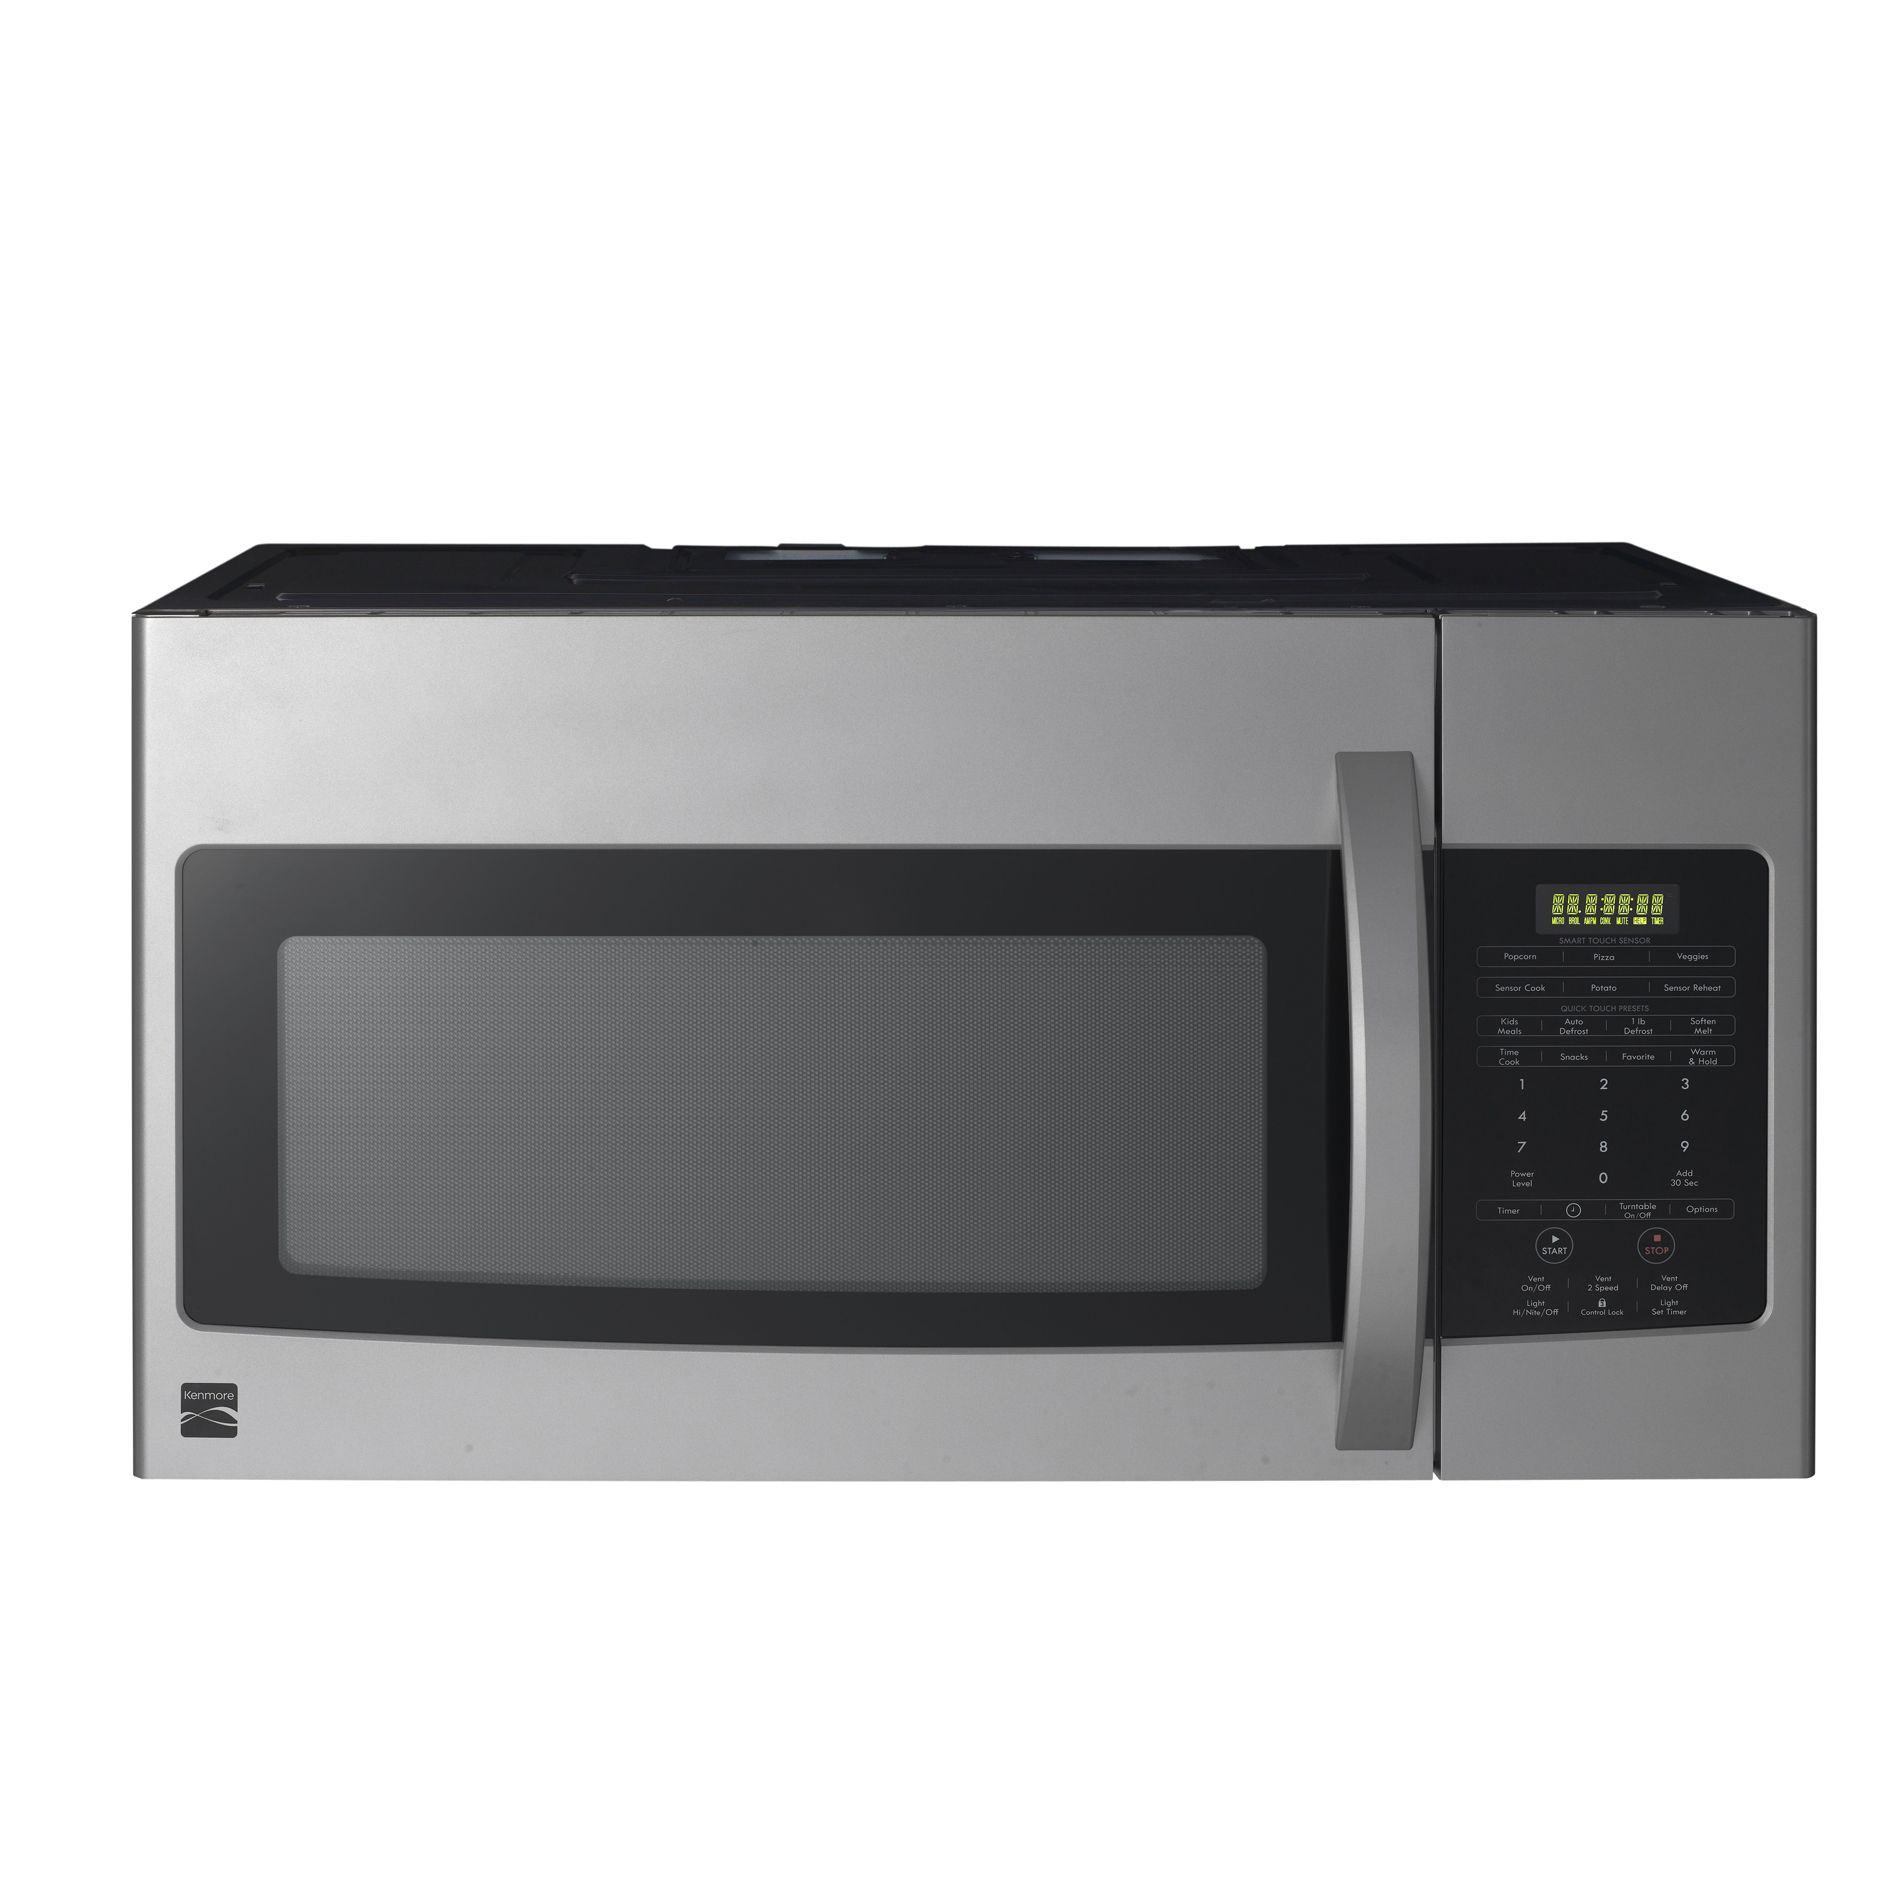 Kenmore Over the Range Microwave 1.7 cu. ft. 85046 - Sears